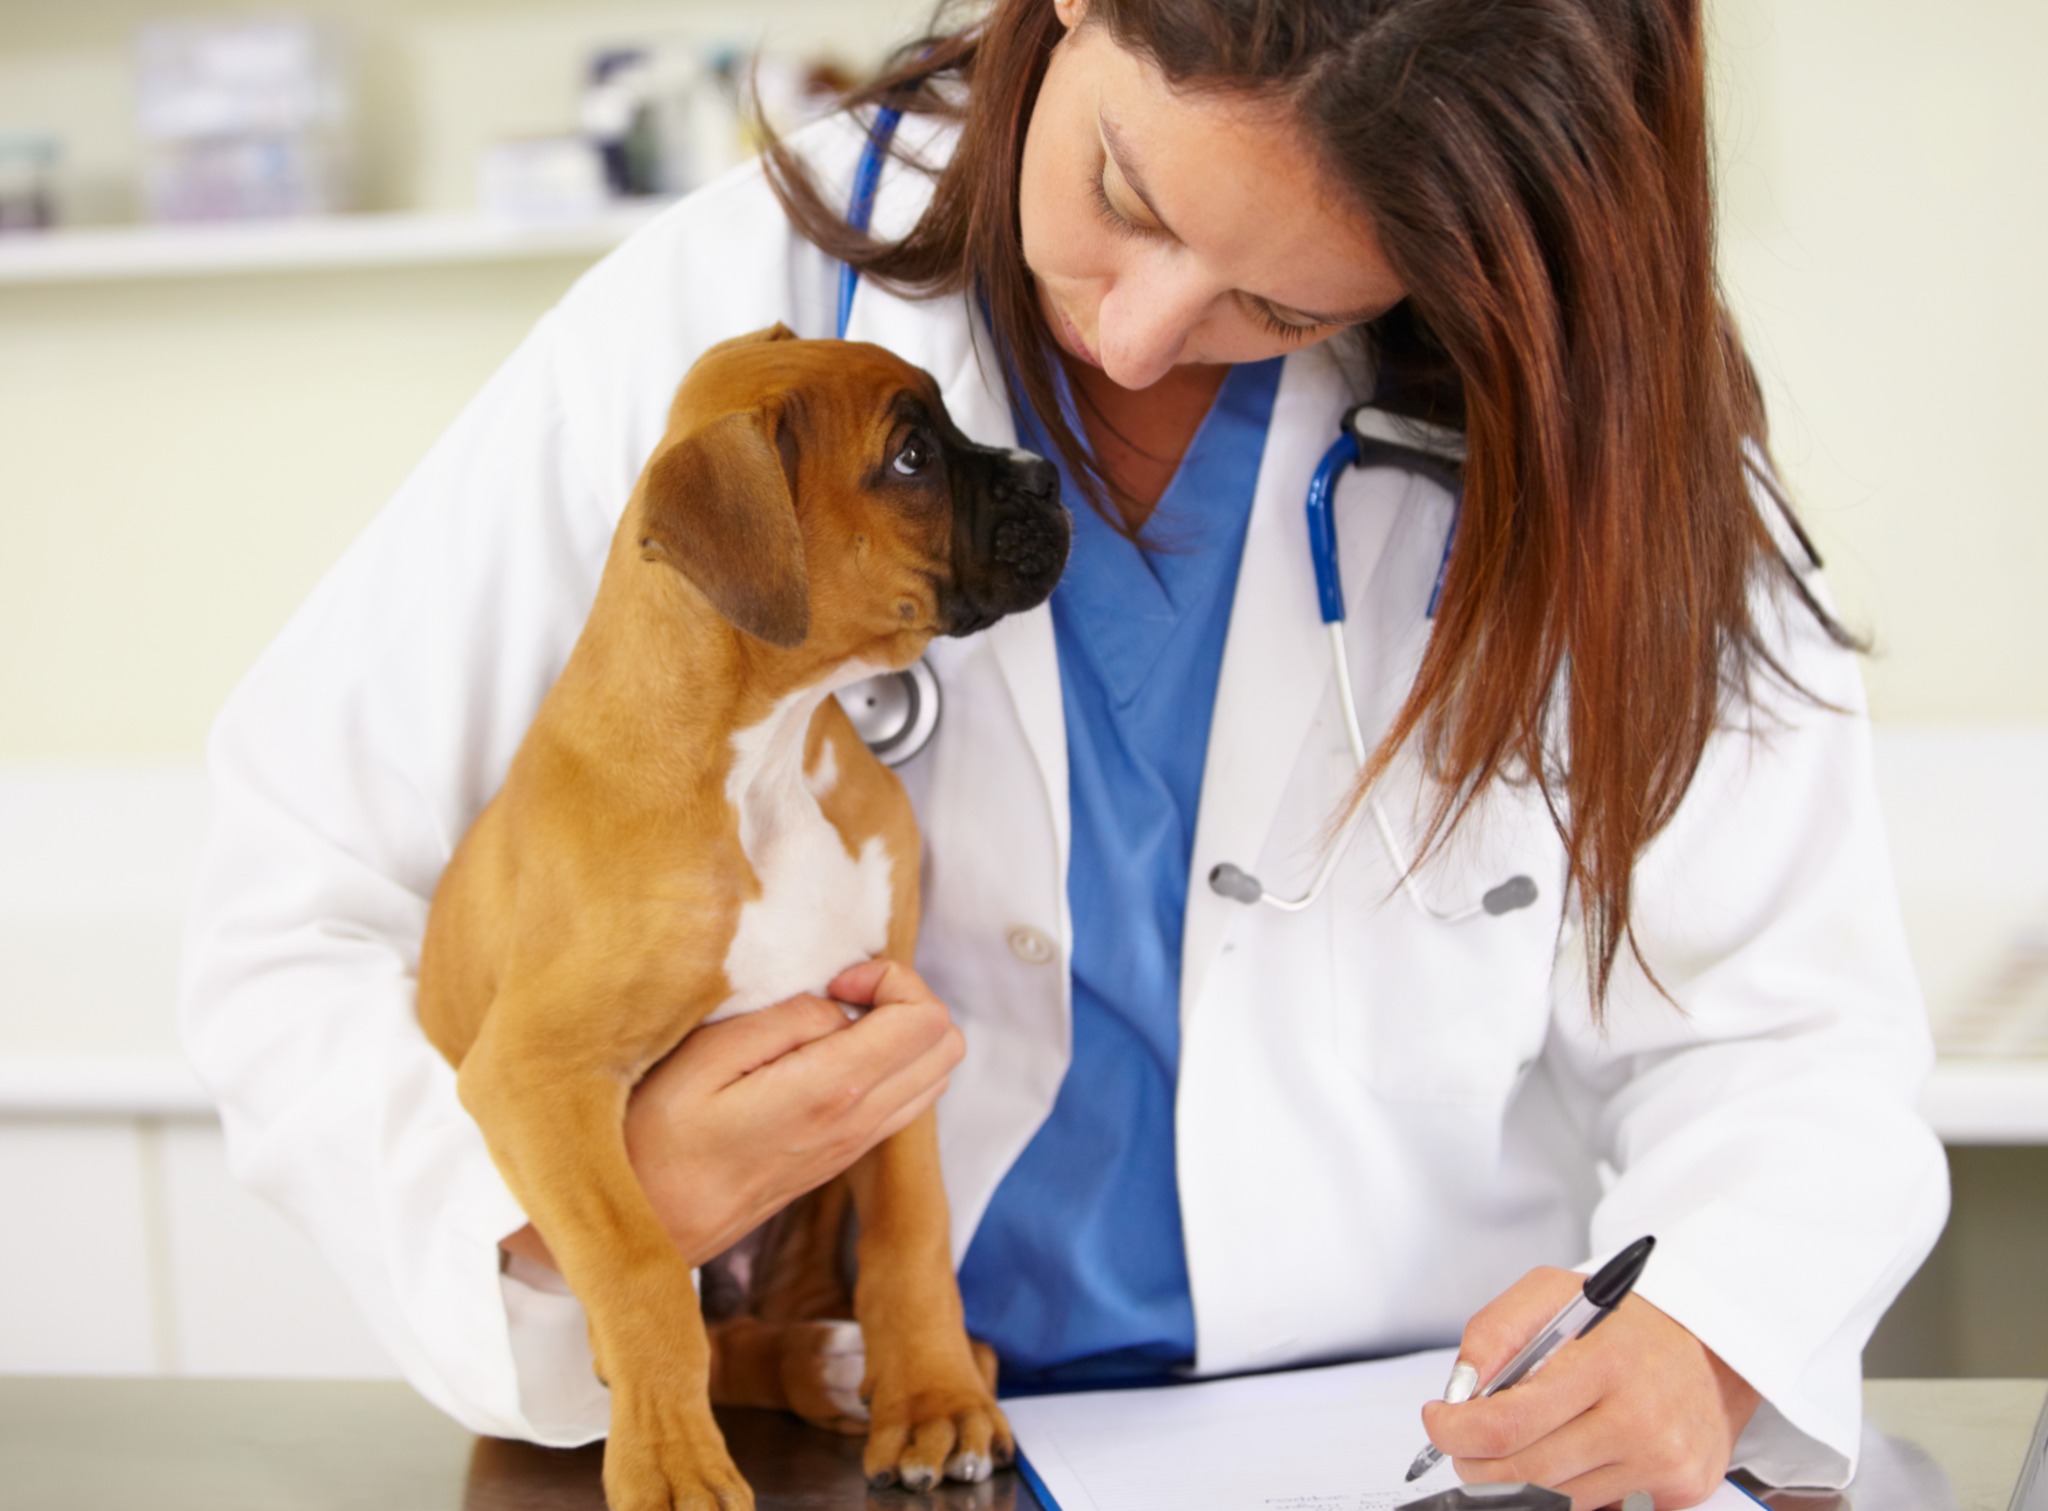 How Software Can Help Veterinarians Build Trust and Open Communication with Clients